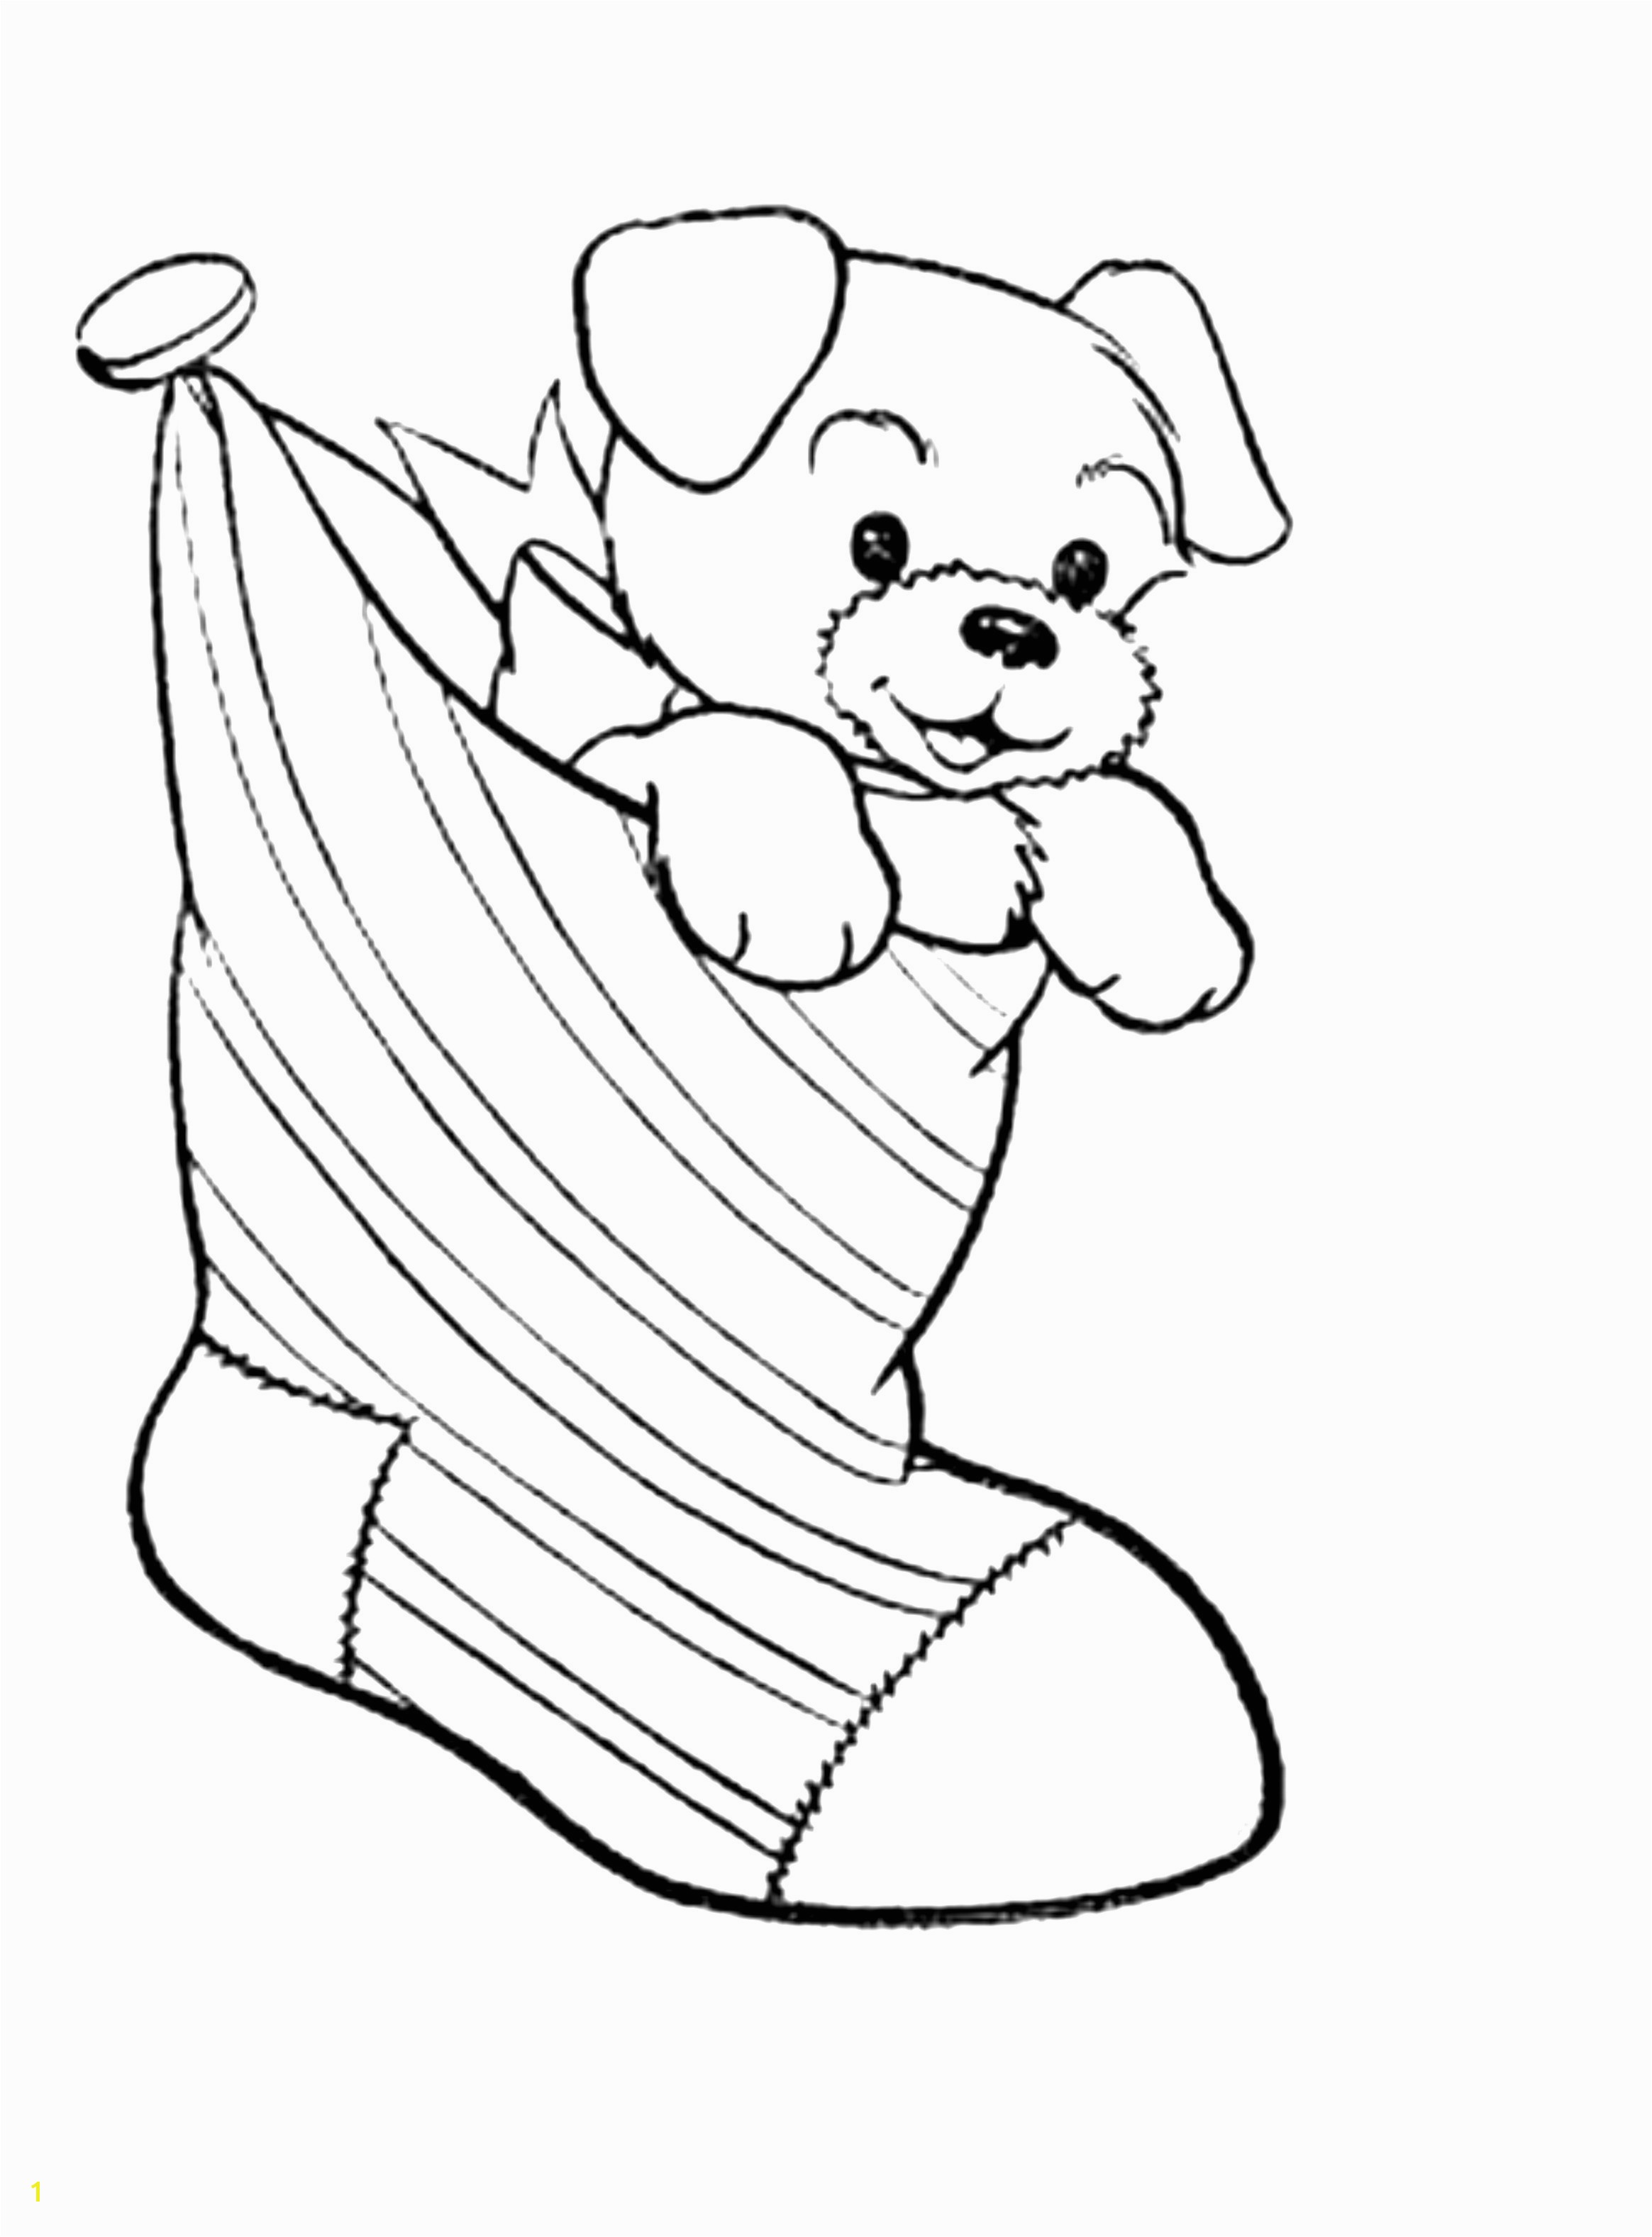 Puppy Coloring Page Free Reproducible Coloring Pages Awesome Crayola Pages 0d Archives